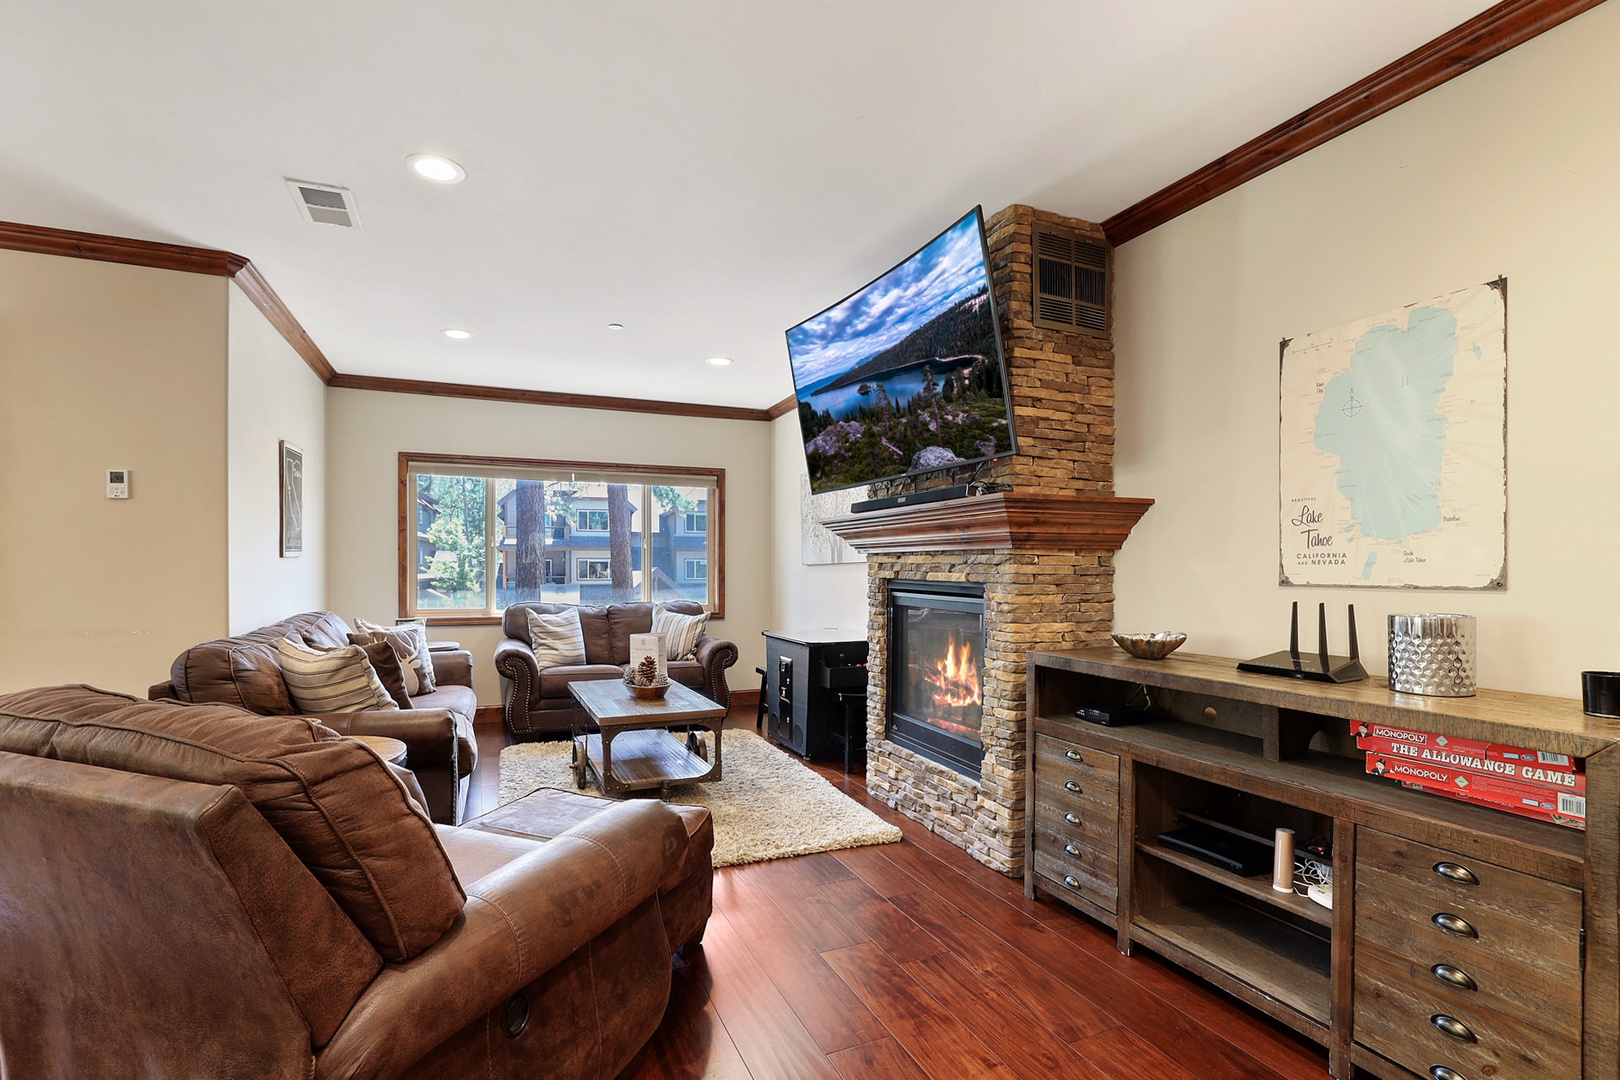 Living room with smart TV & gas fireplace